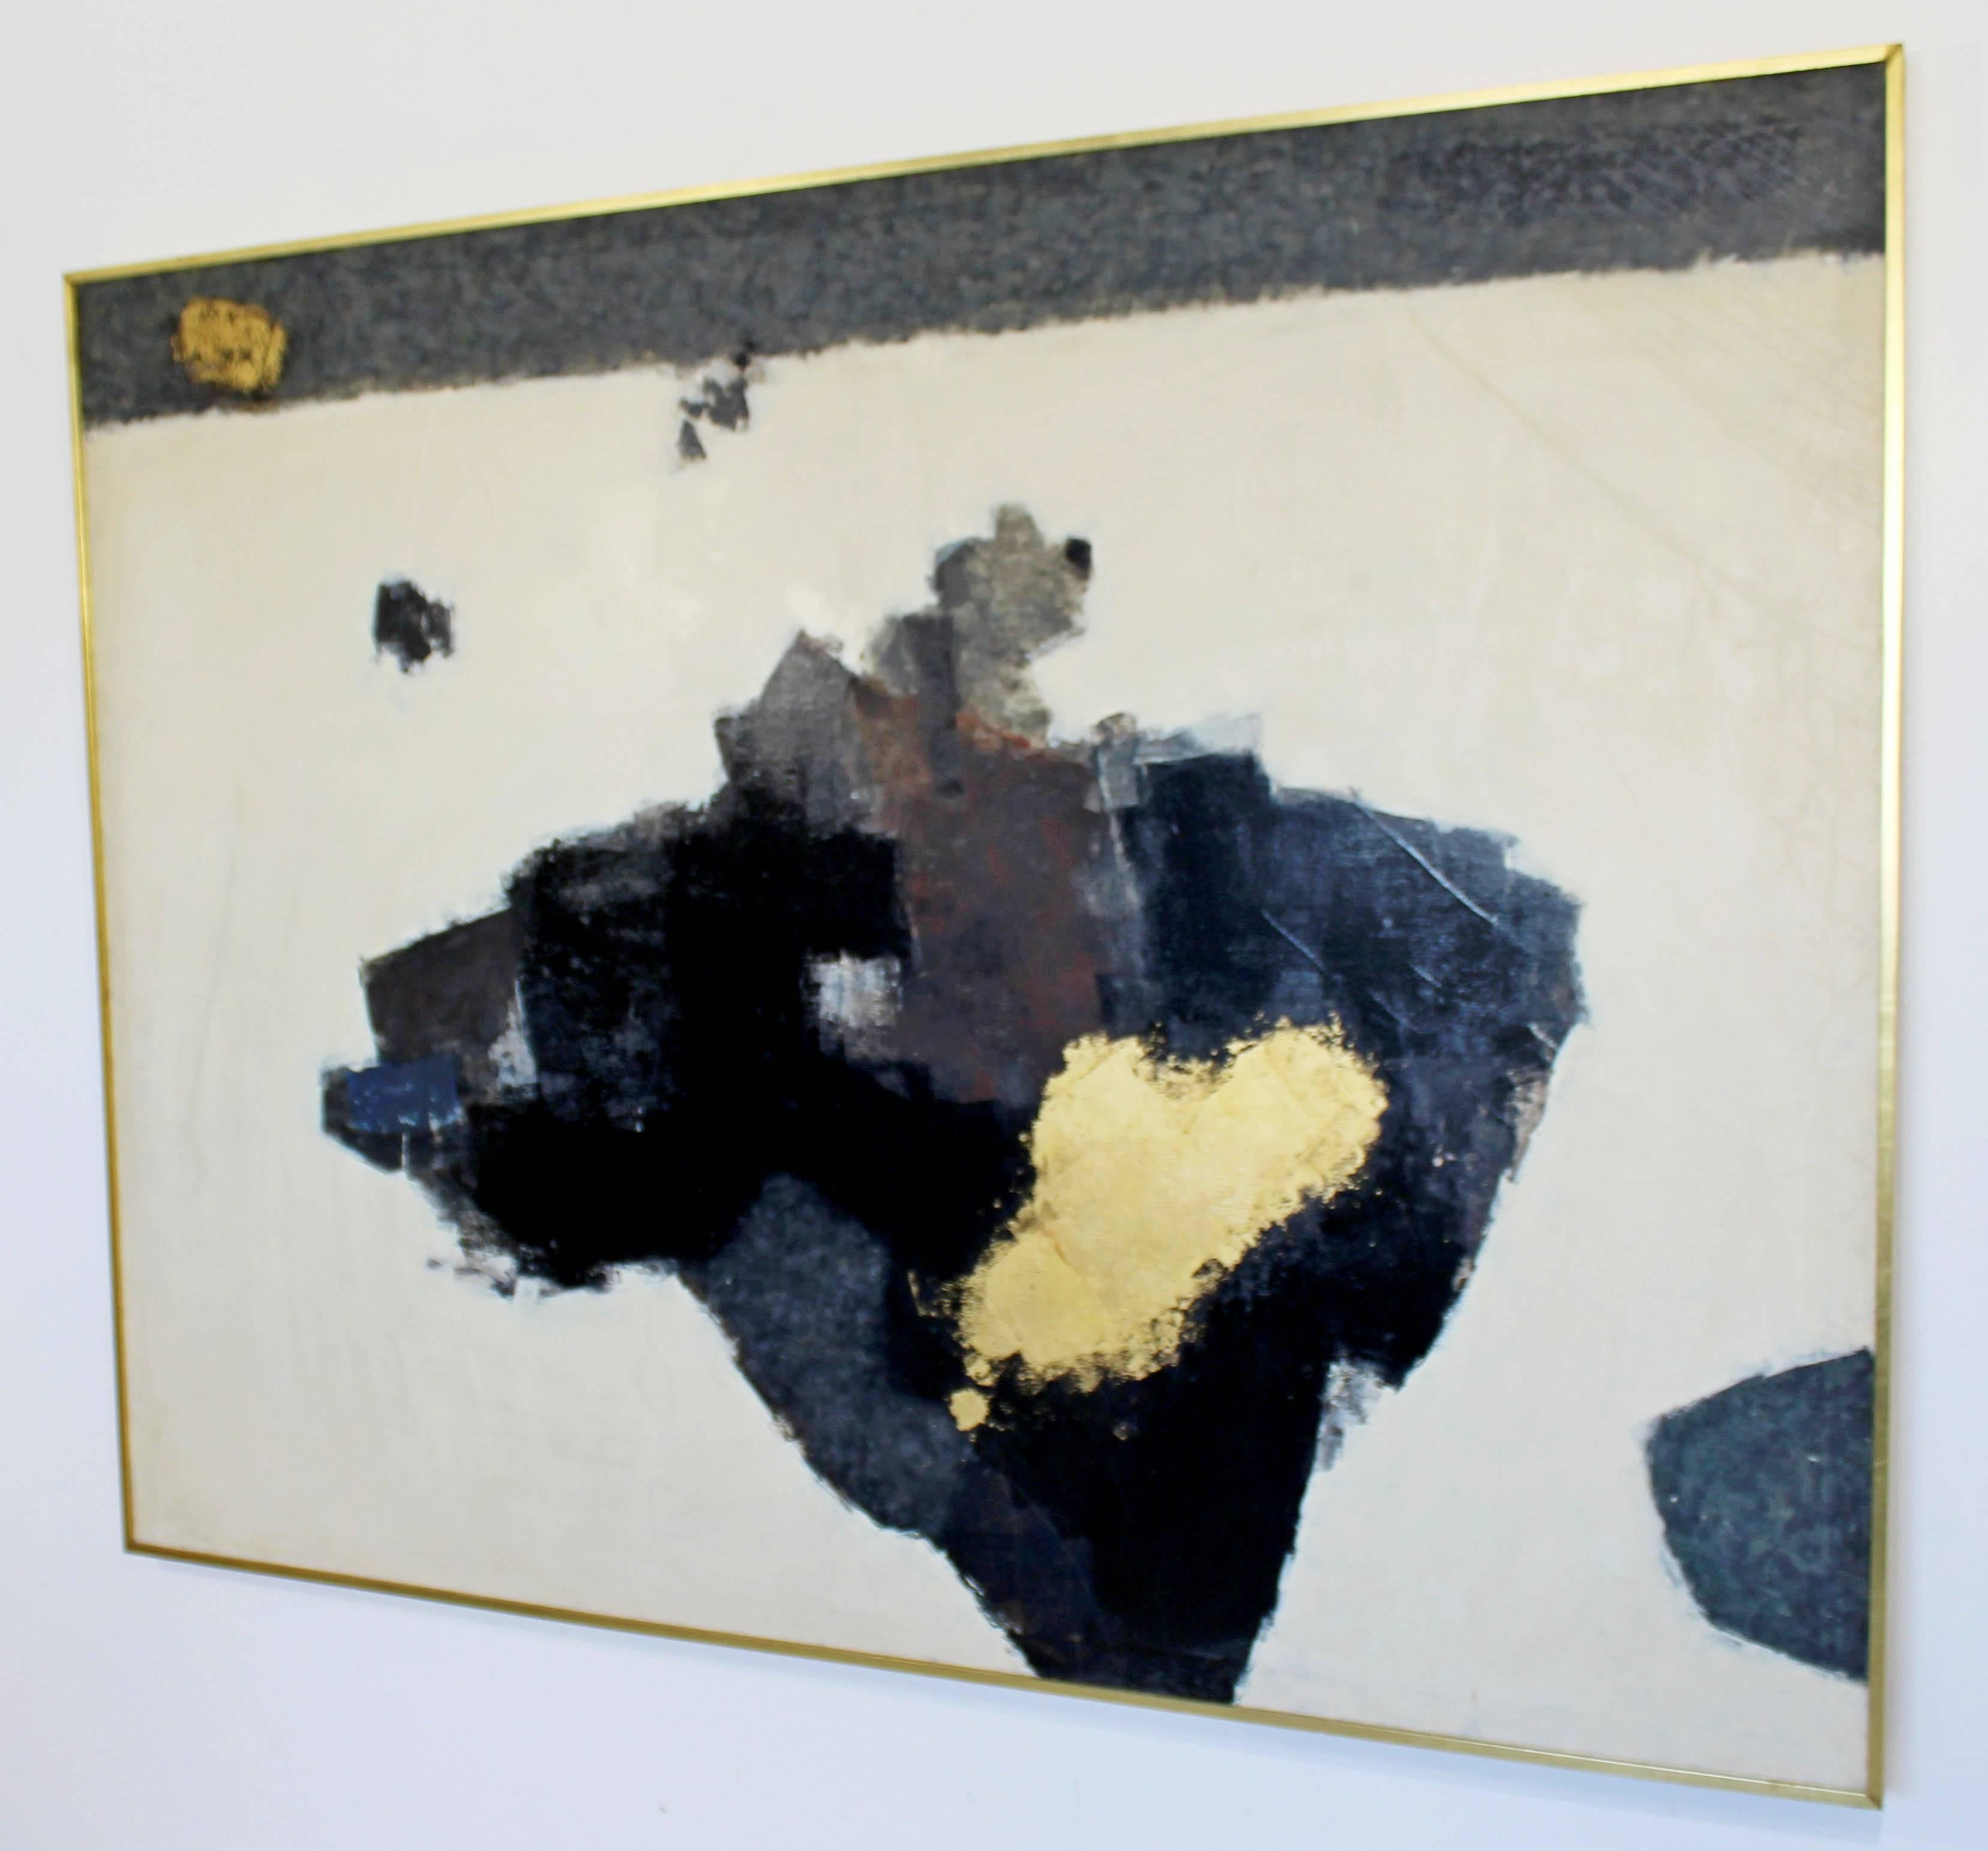 American Mid-Century Modern X Large Framed Abstract Acrylic Painting by Y. Ohashi, 1955